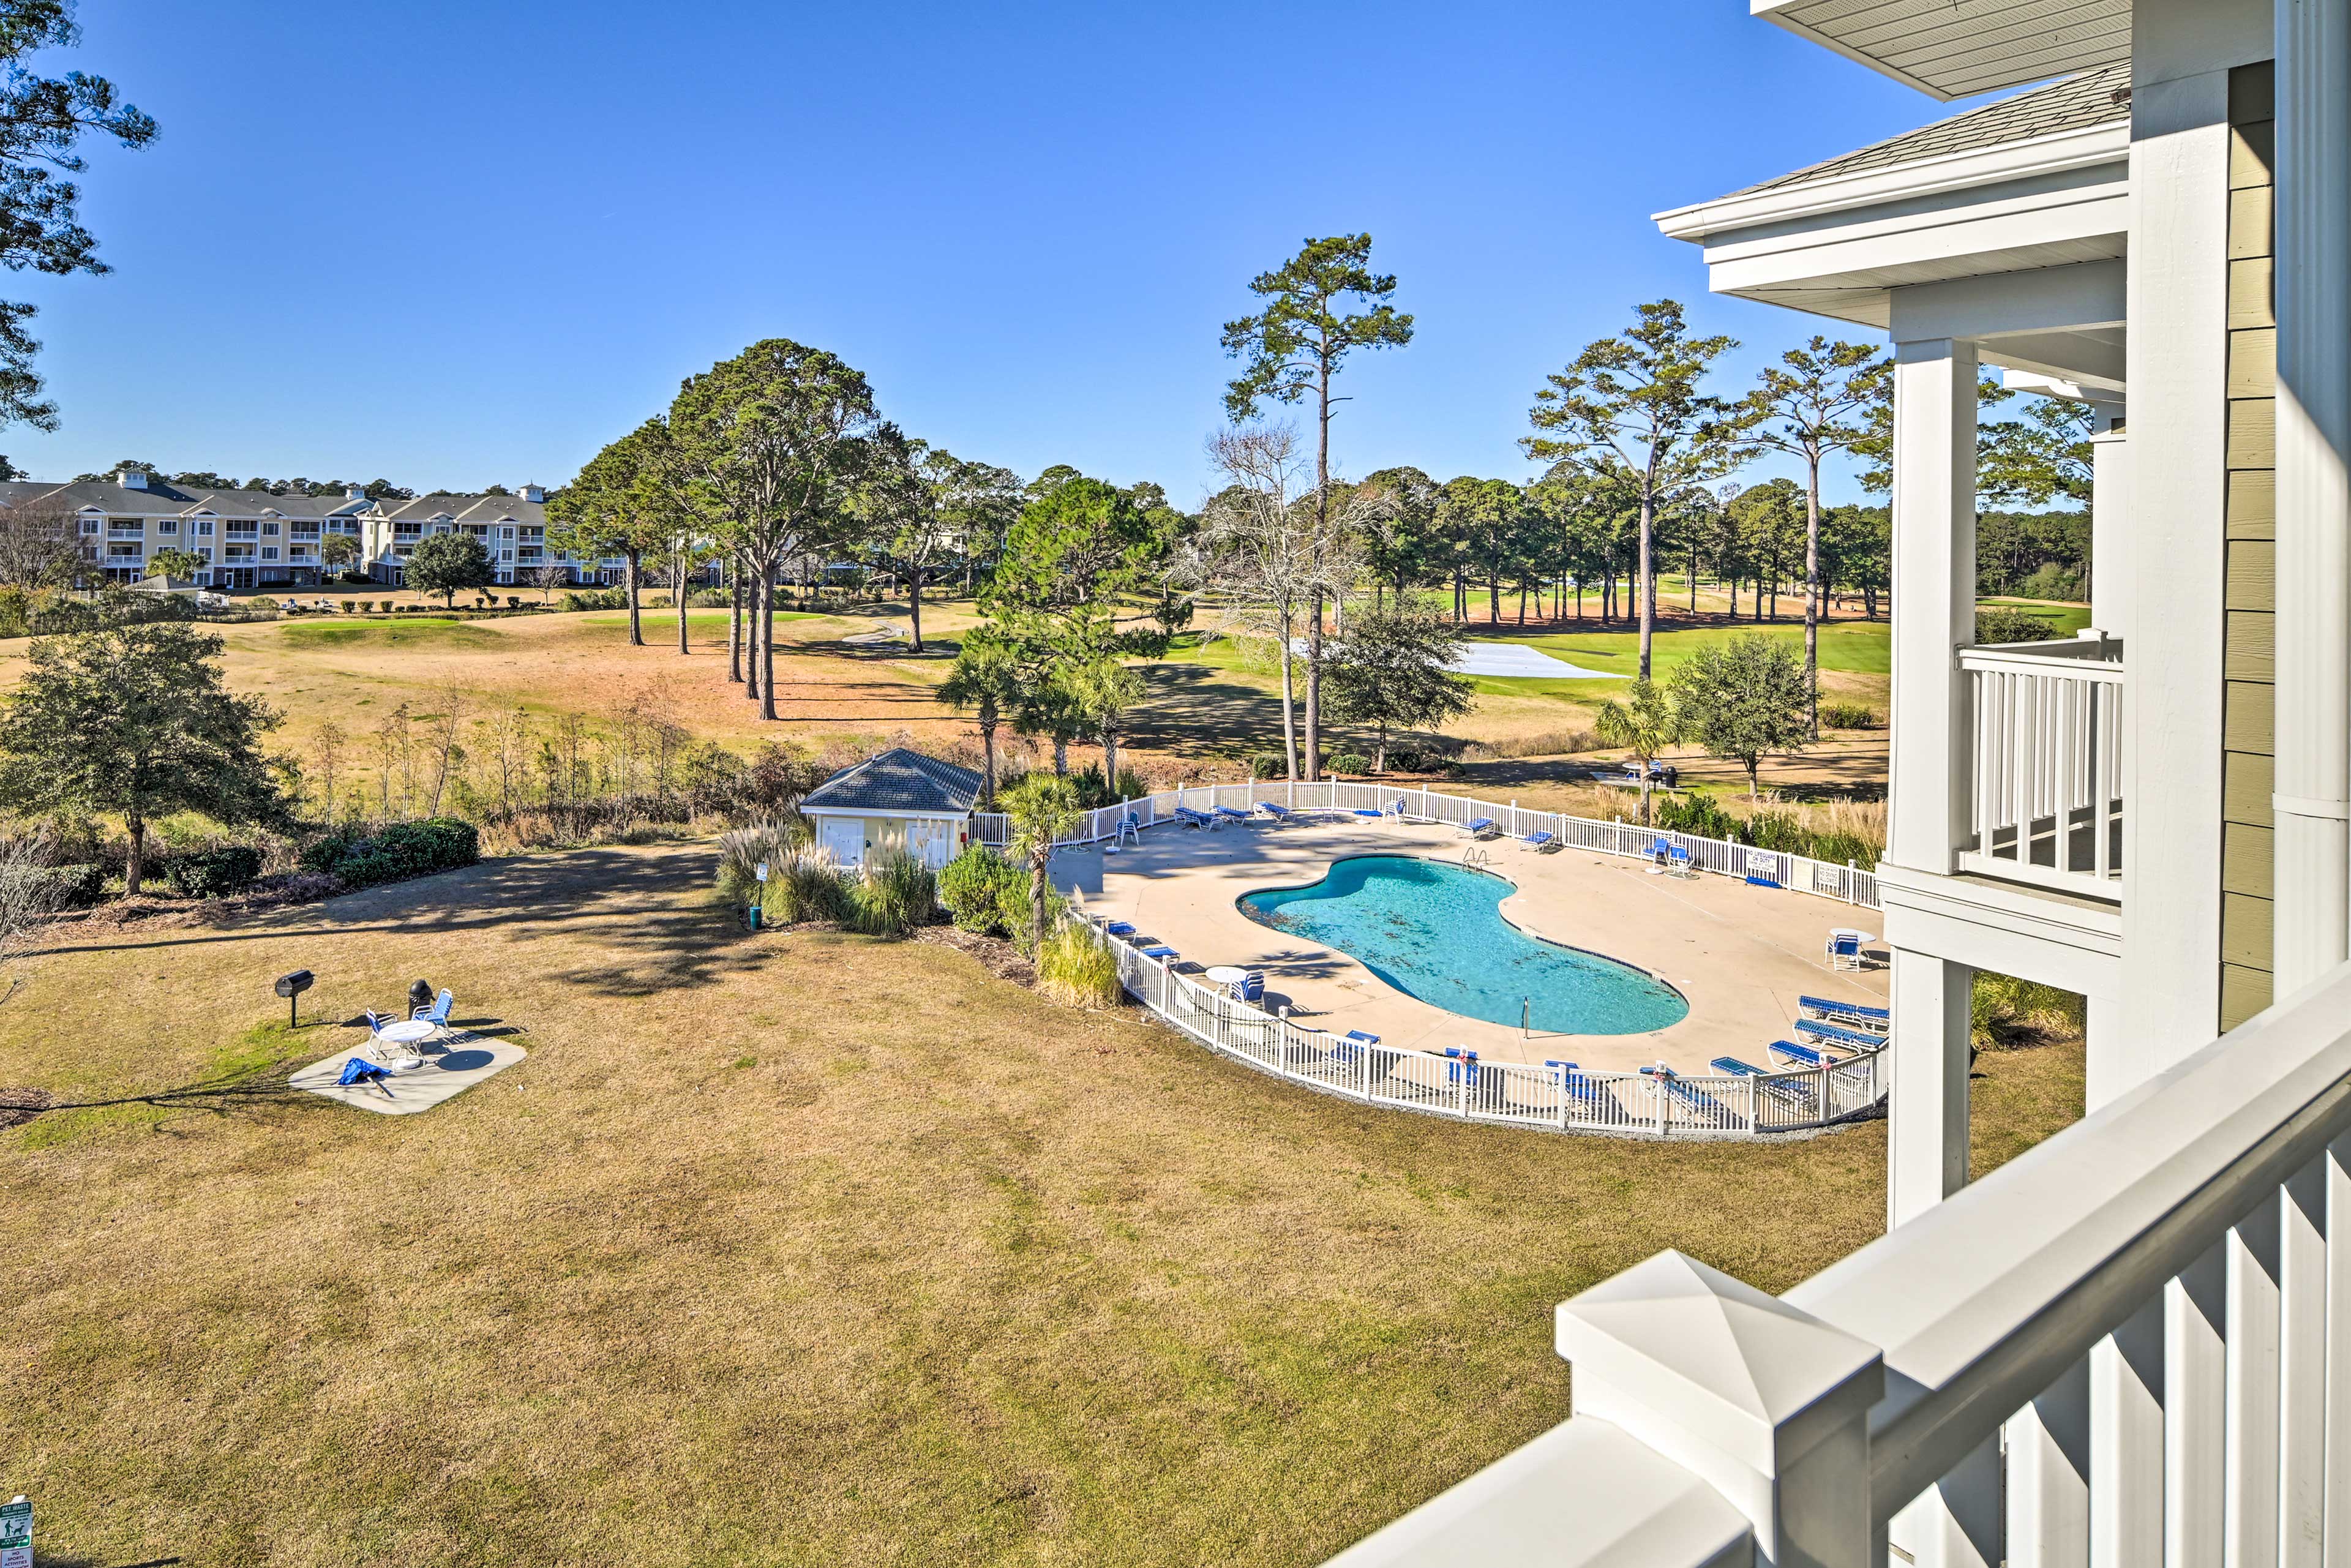 Community Amenities | 7 Pools | Fitness Center | Grill Area